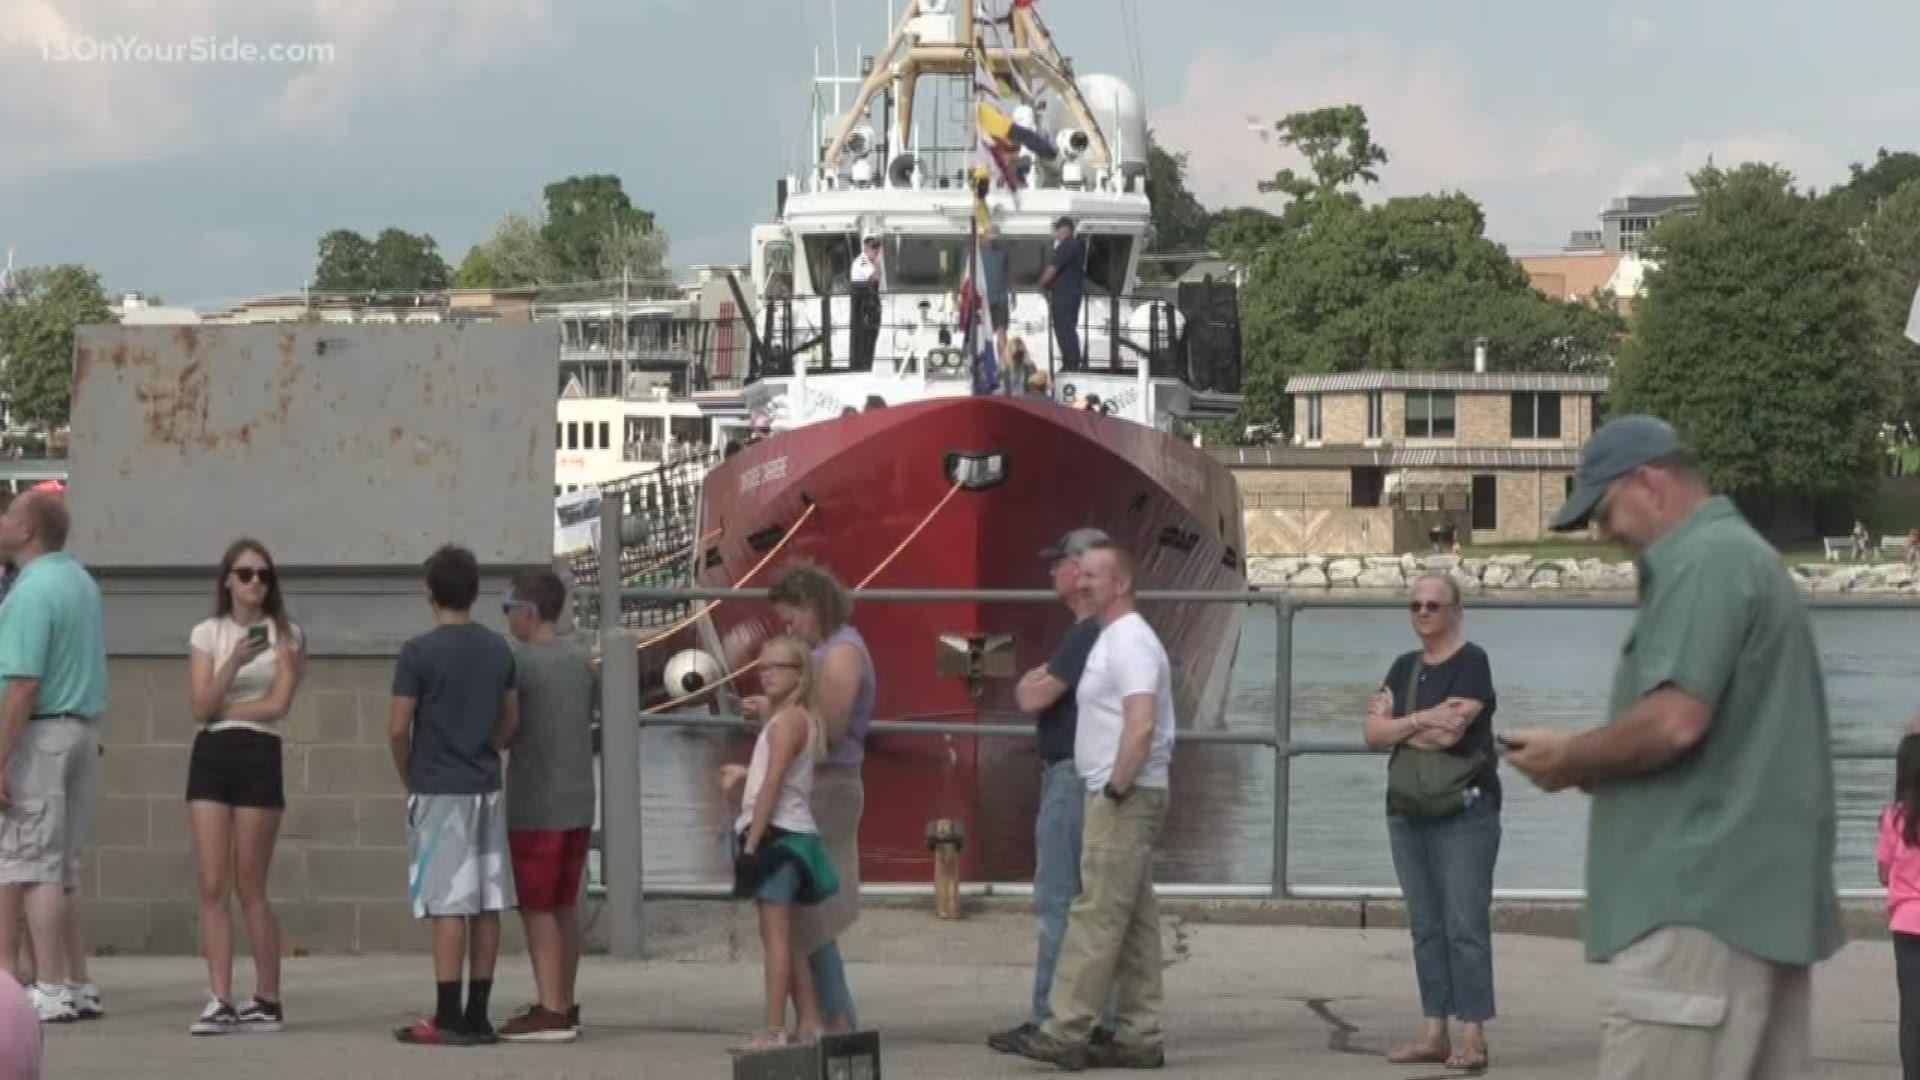 The Grand Haven Coast Guard Festival is just around the corner. The nationally recognized festival honors and respects men and women who serve in the United States Coast Guard. It runs Friday, July 26 through Sunday, Aug. 4.